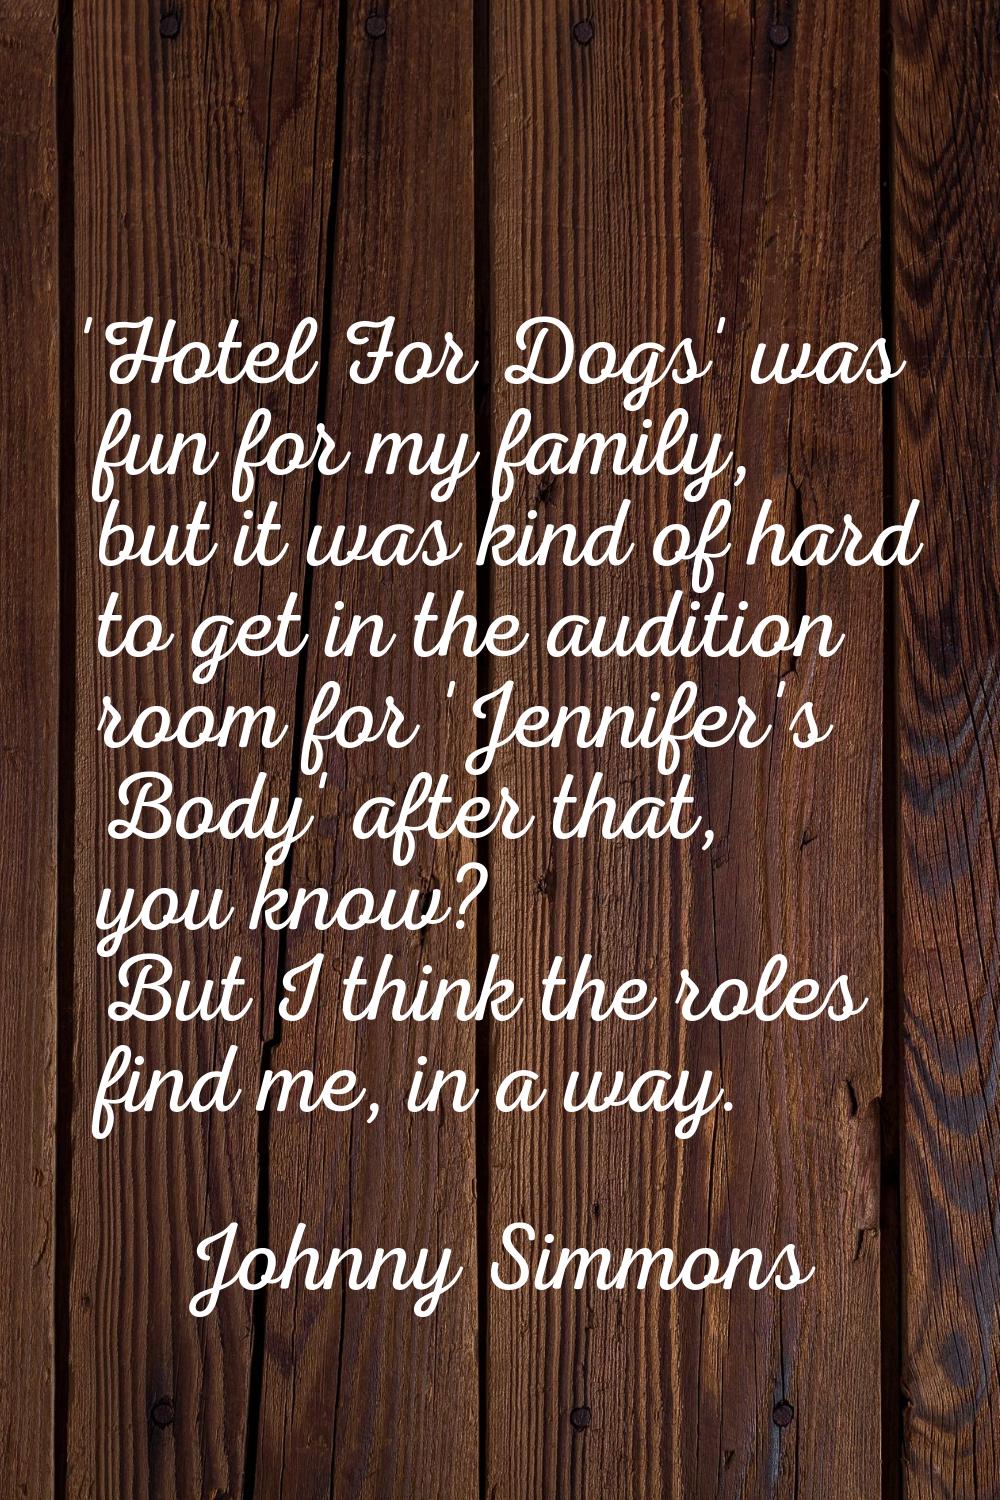 'Hotel For Dogs' was fun for my family, but it was kind of hard to get in the audition room for 'Je